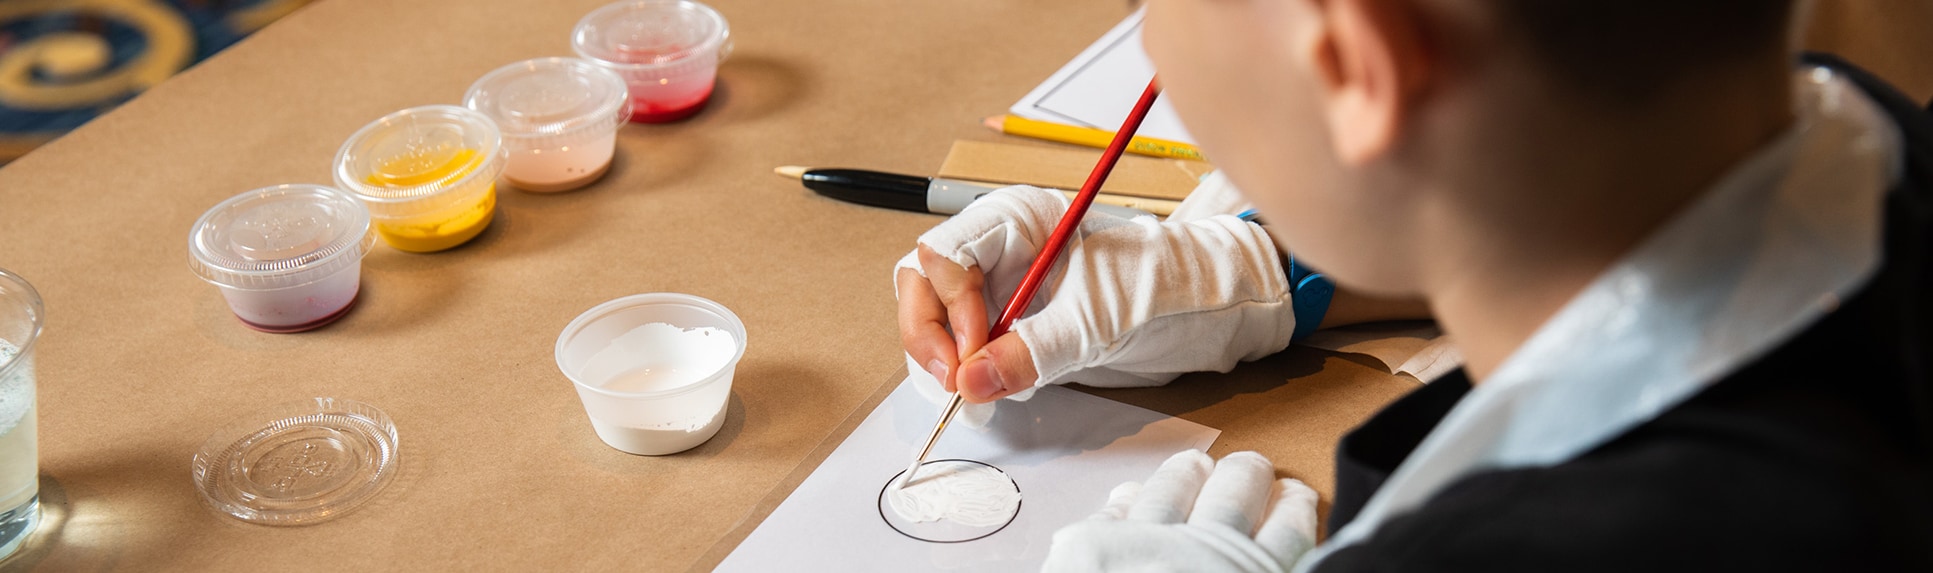 A boy wearing gloves paints inside a circle on a desk lined with art supplies